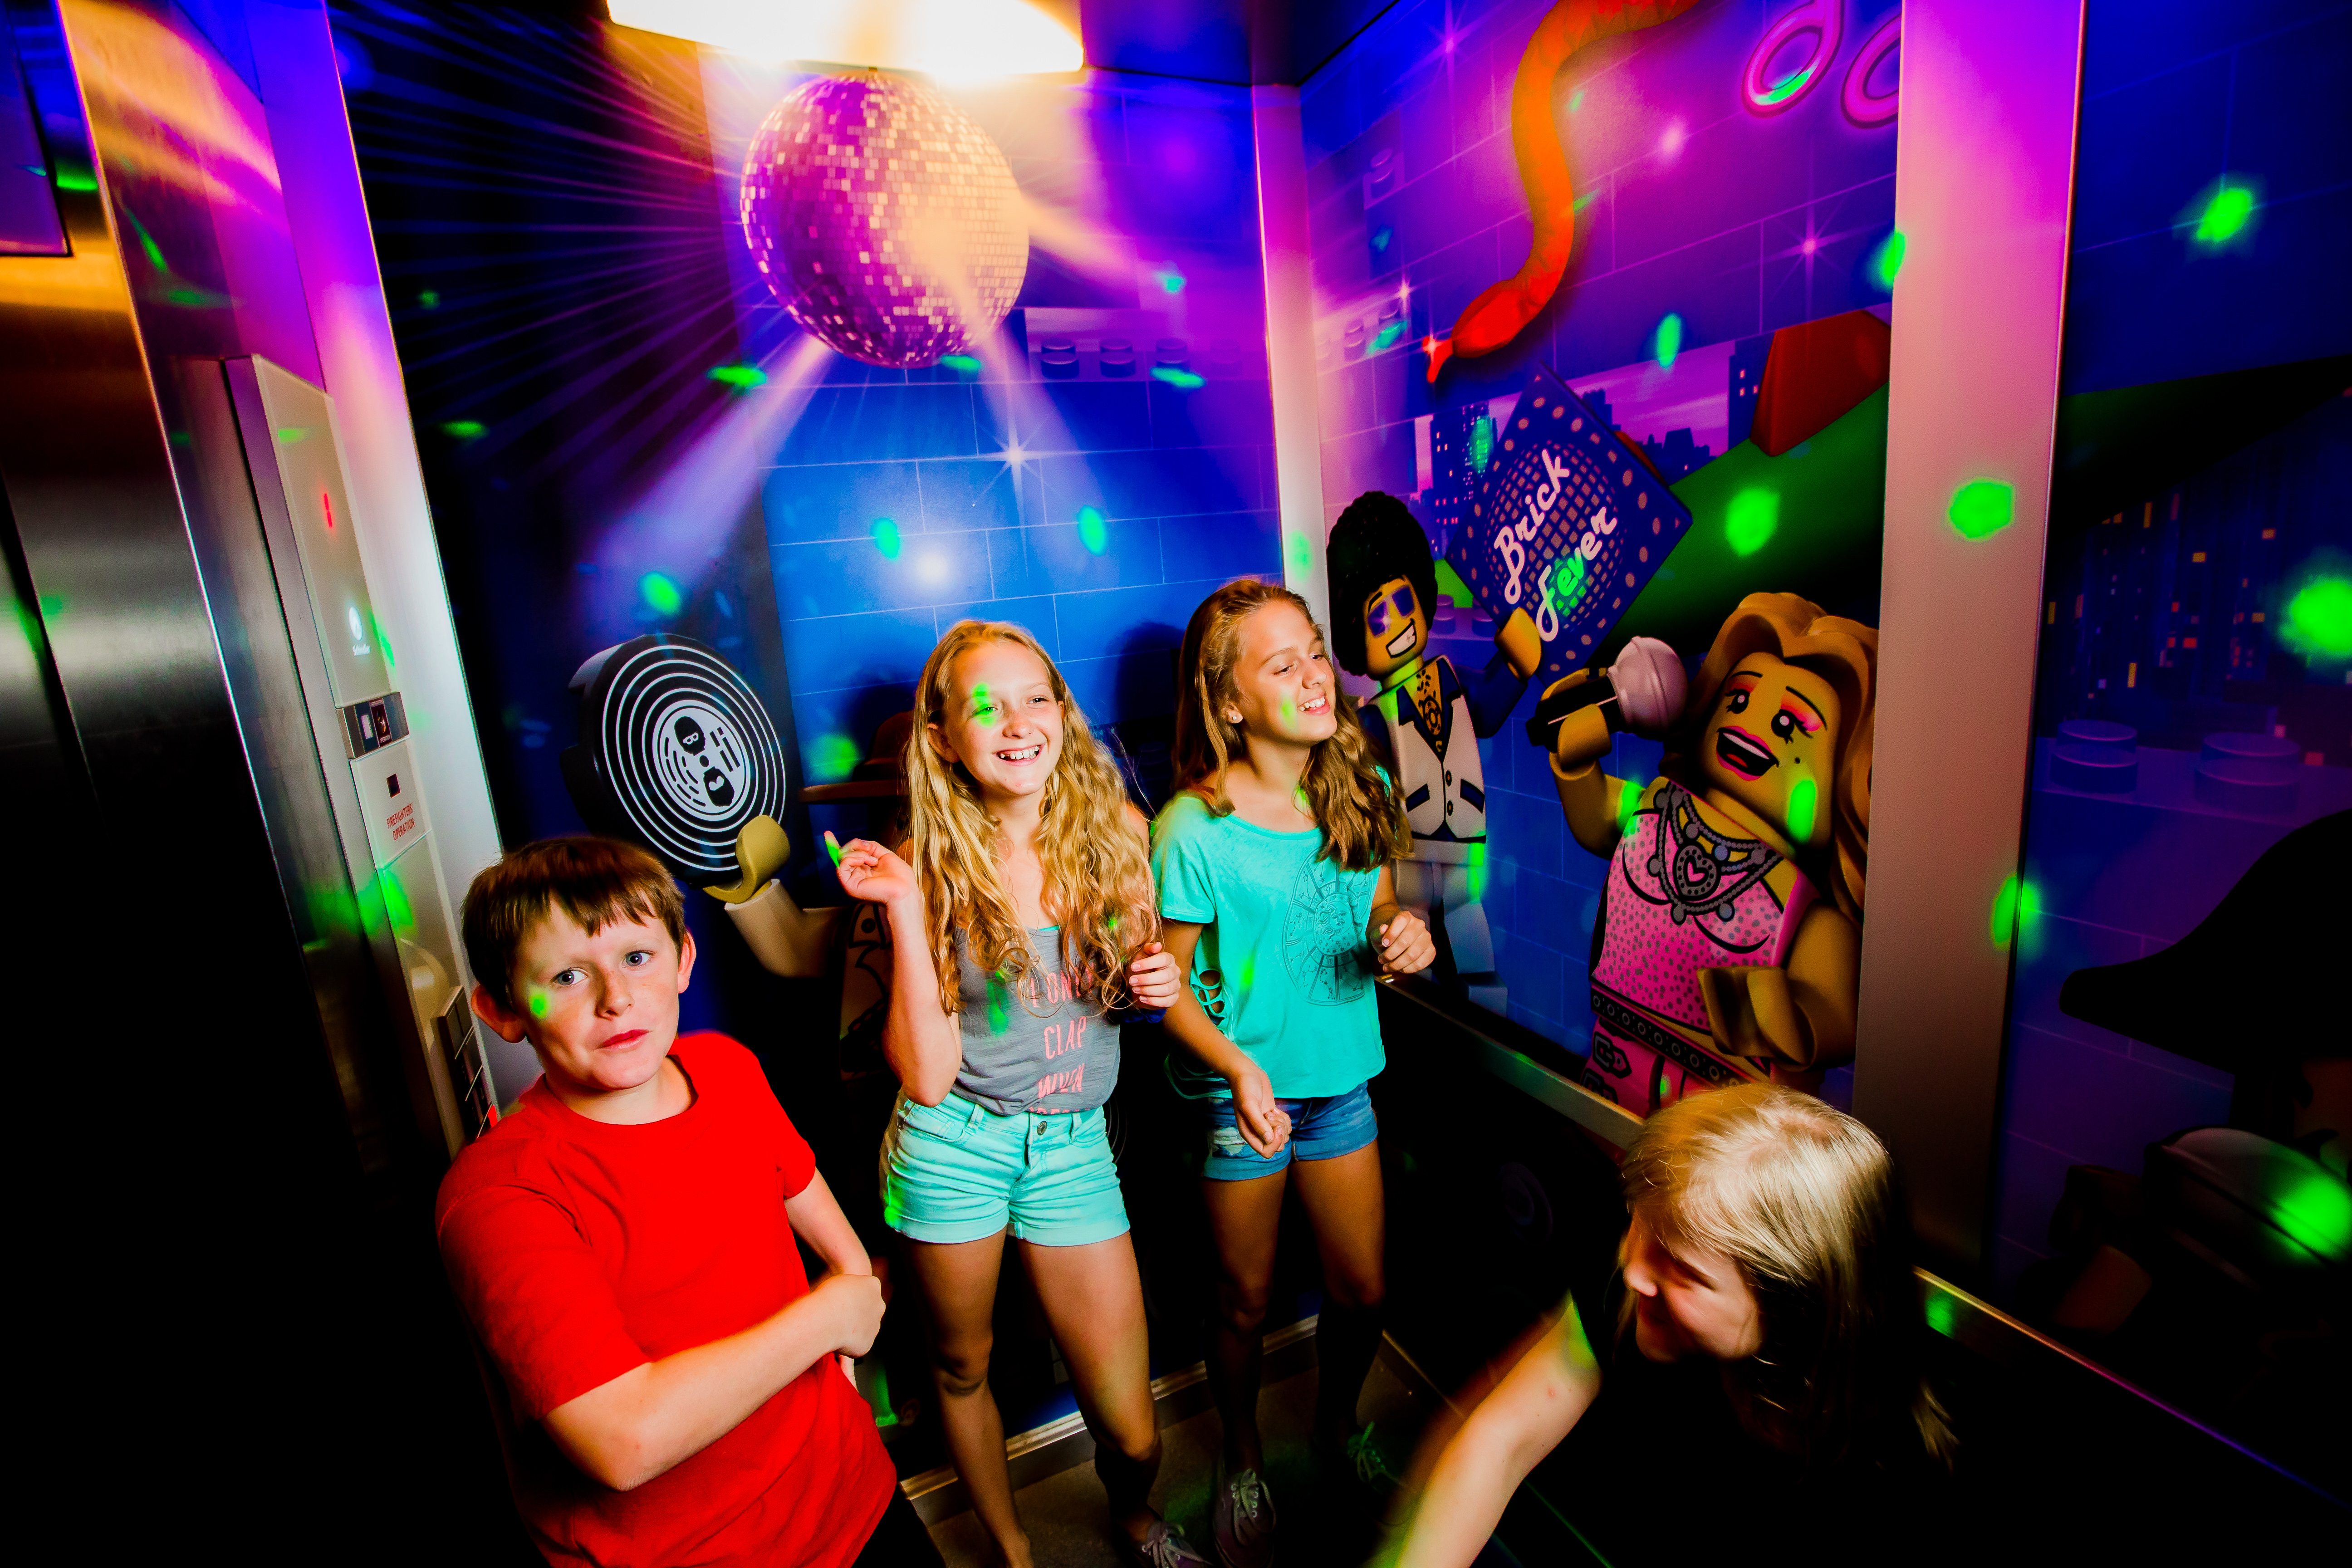 Break out your dance moves in the Disco Dance Party Elevator